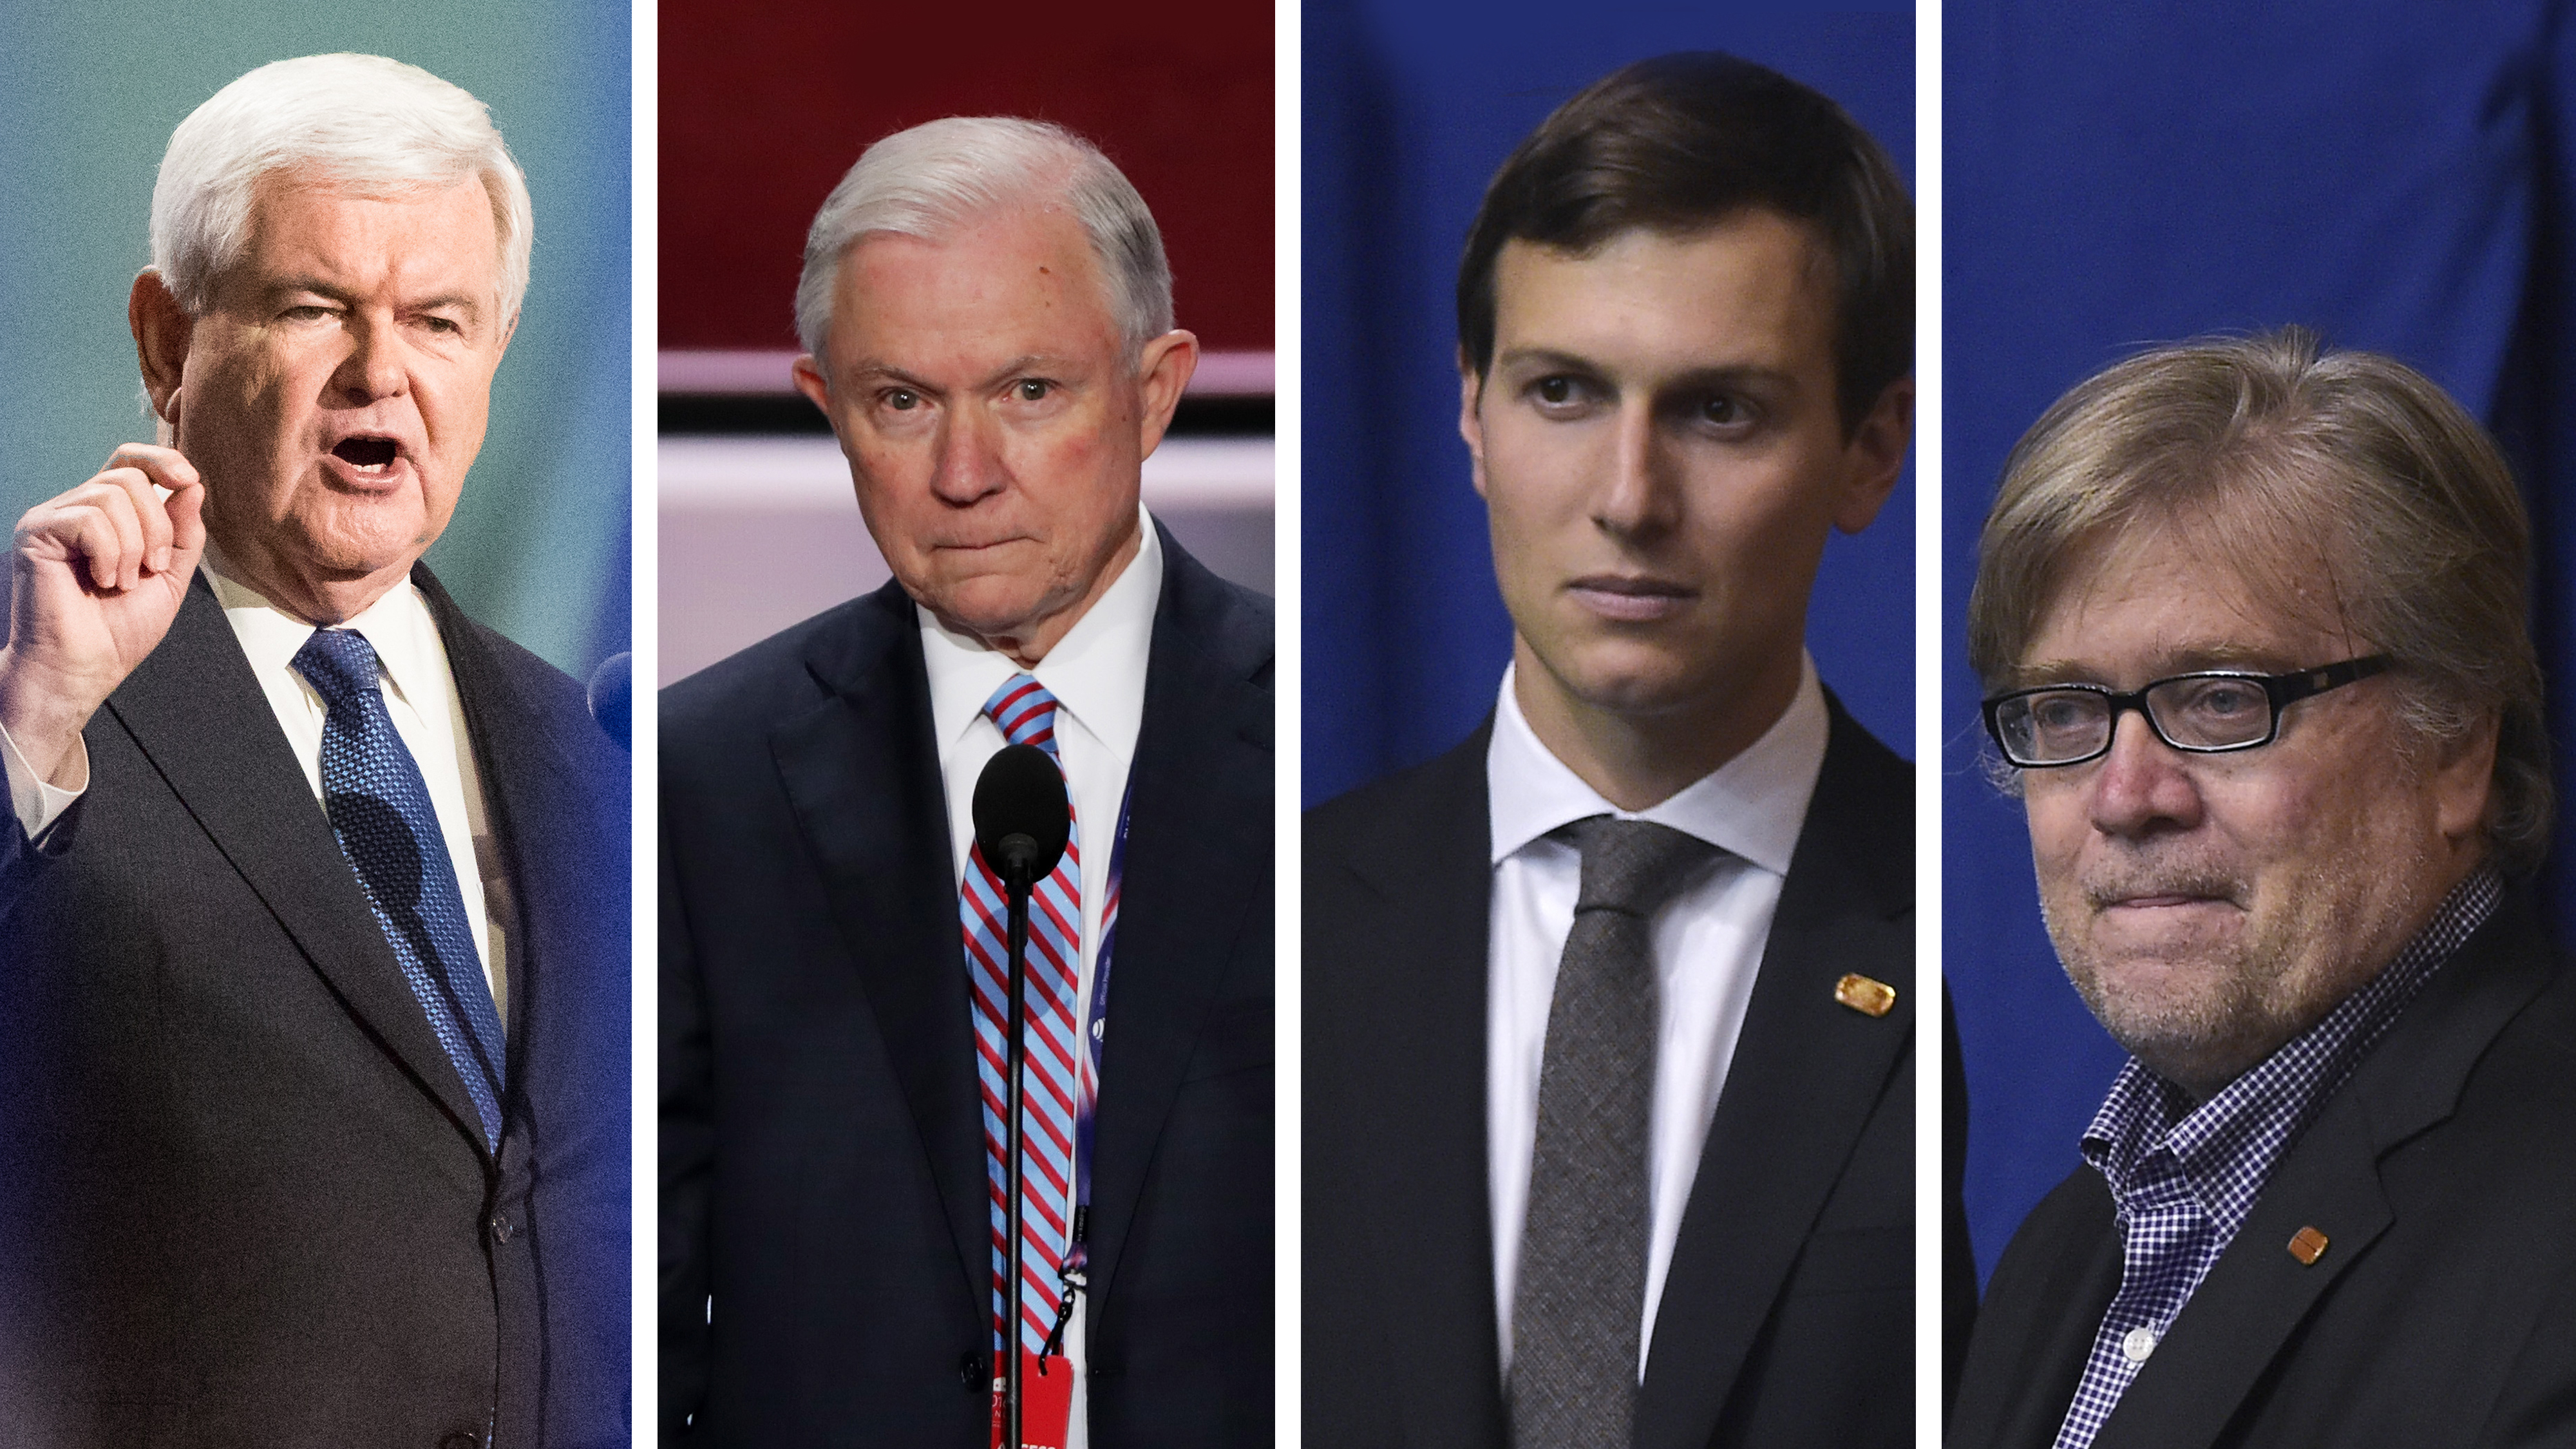 Former House Speaker Newt Gingrich, Sen. Jeff Sessions of Alabama, Trump's son-in-law Jared Kushner, and Trump campaign CEO Stephen Bannon have all been mentioned as possibilities for major roles in the president-elect's administration. L: Alex Wong, Brett Carlsen, Mandel Ngan/Getty Images